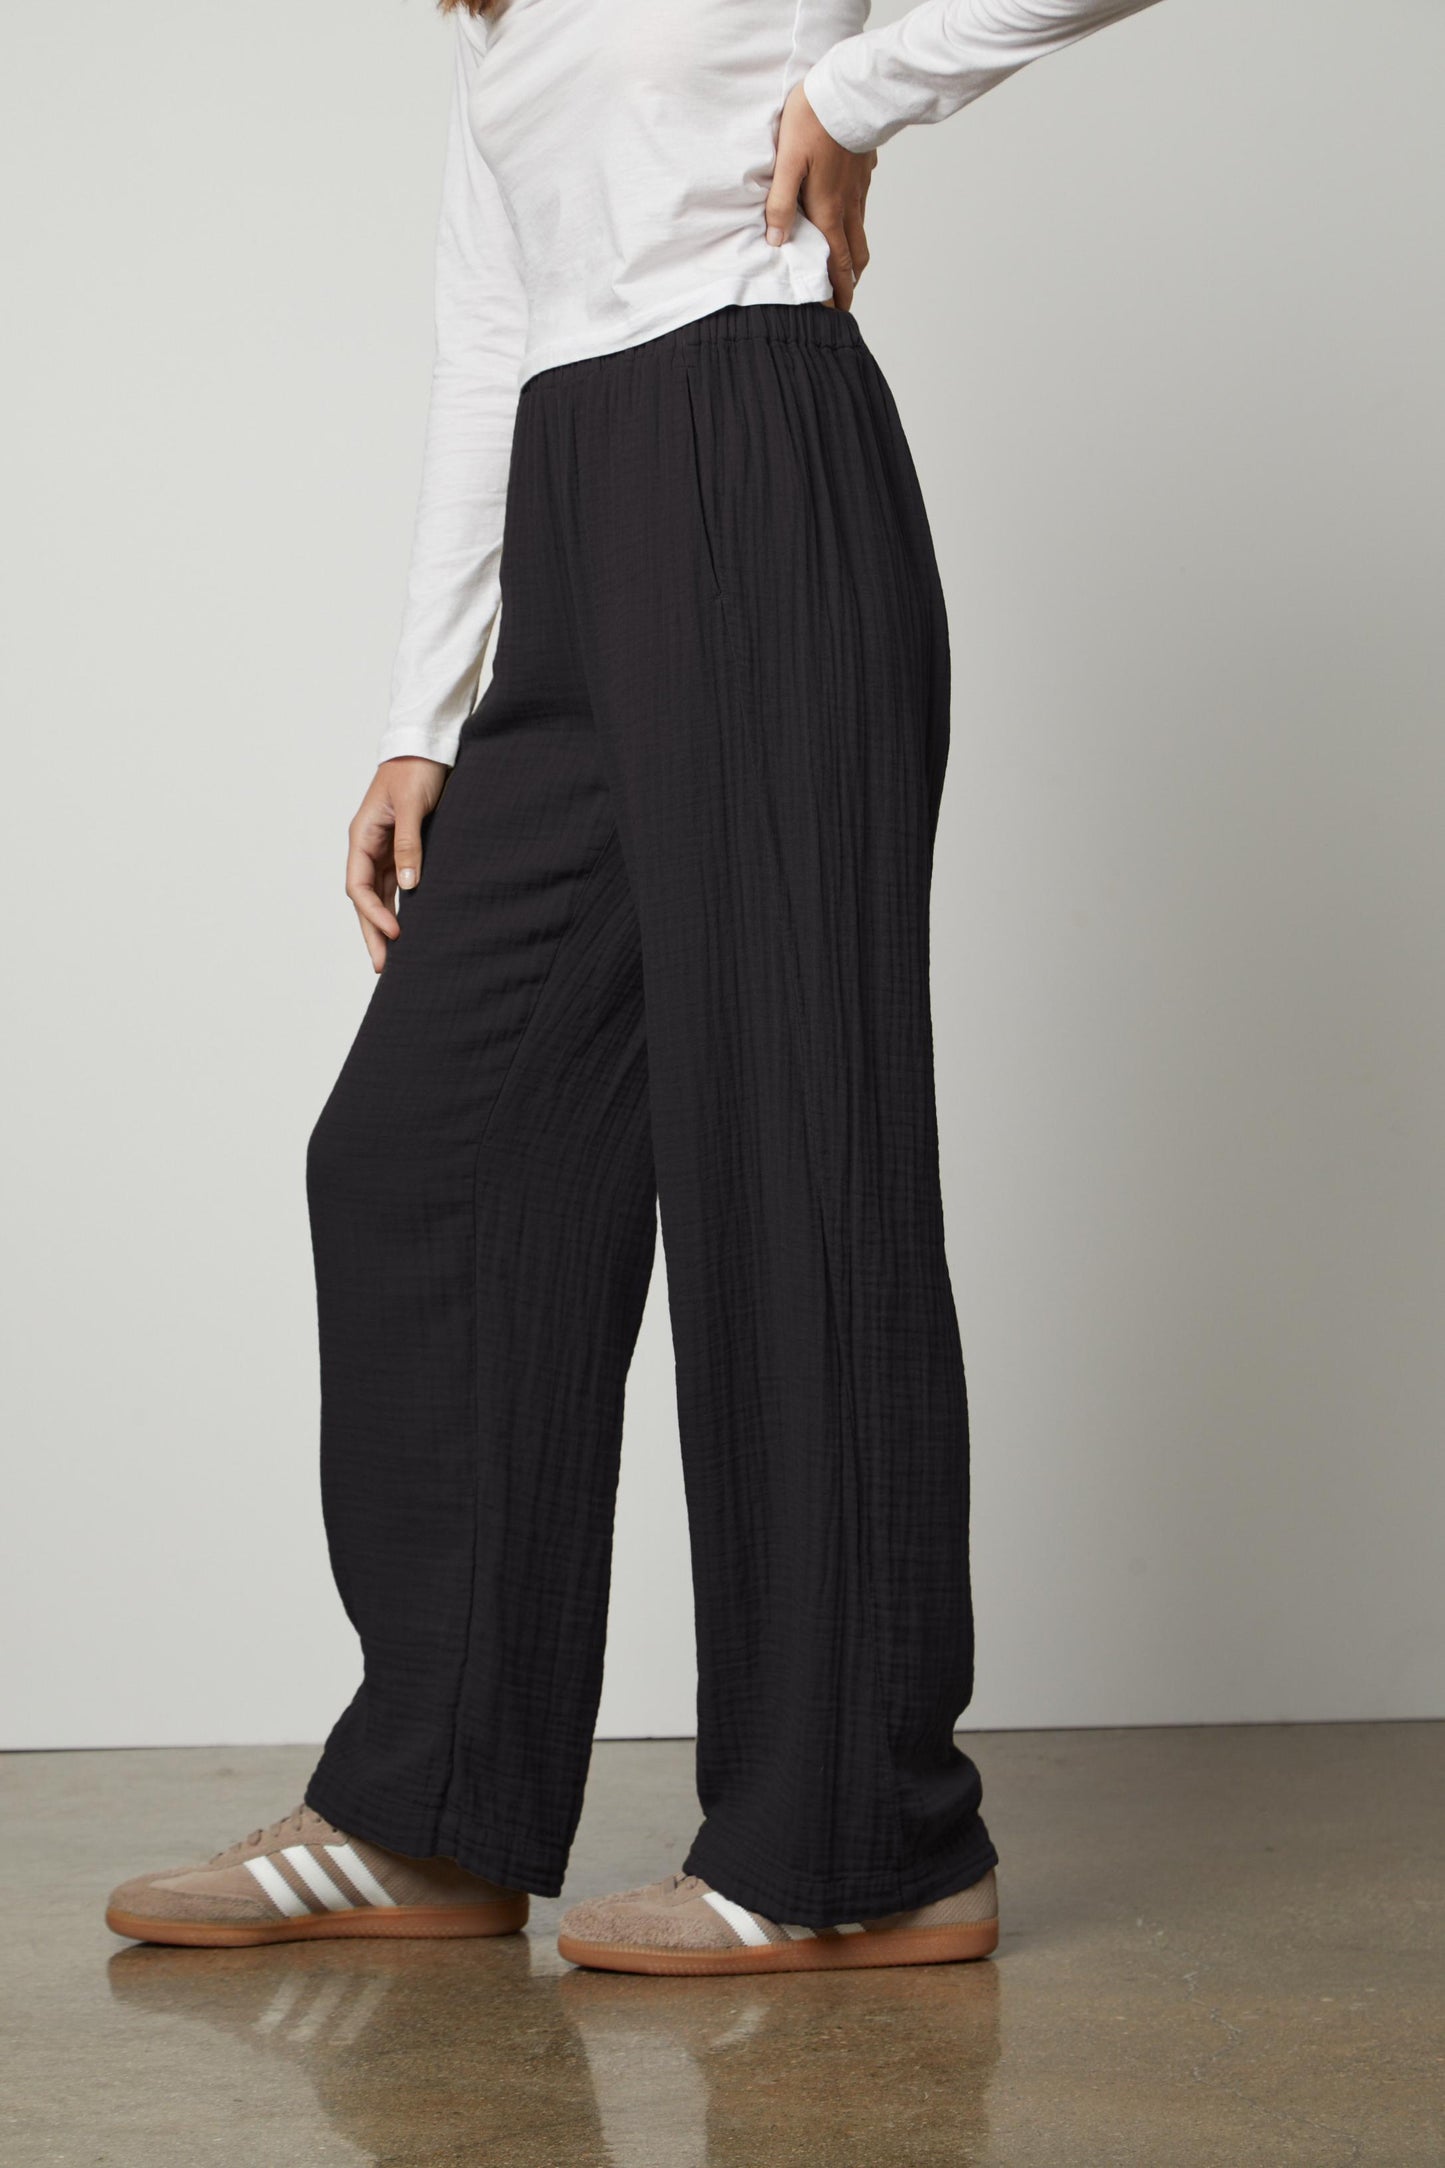 A woman wearing Velvet by Graham & Spencer's JERRY COTTON GAUZE PANT with an elastic waistband and a white t-shirt.-35660385059009